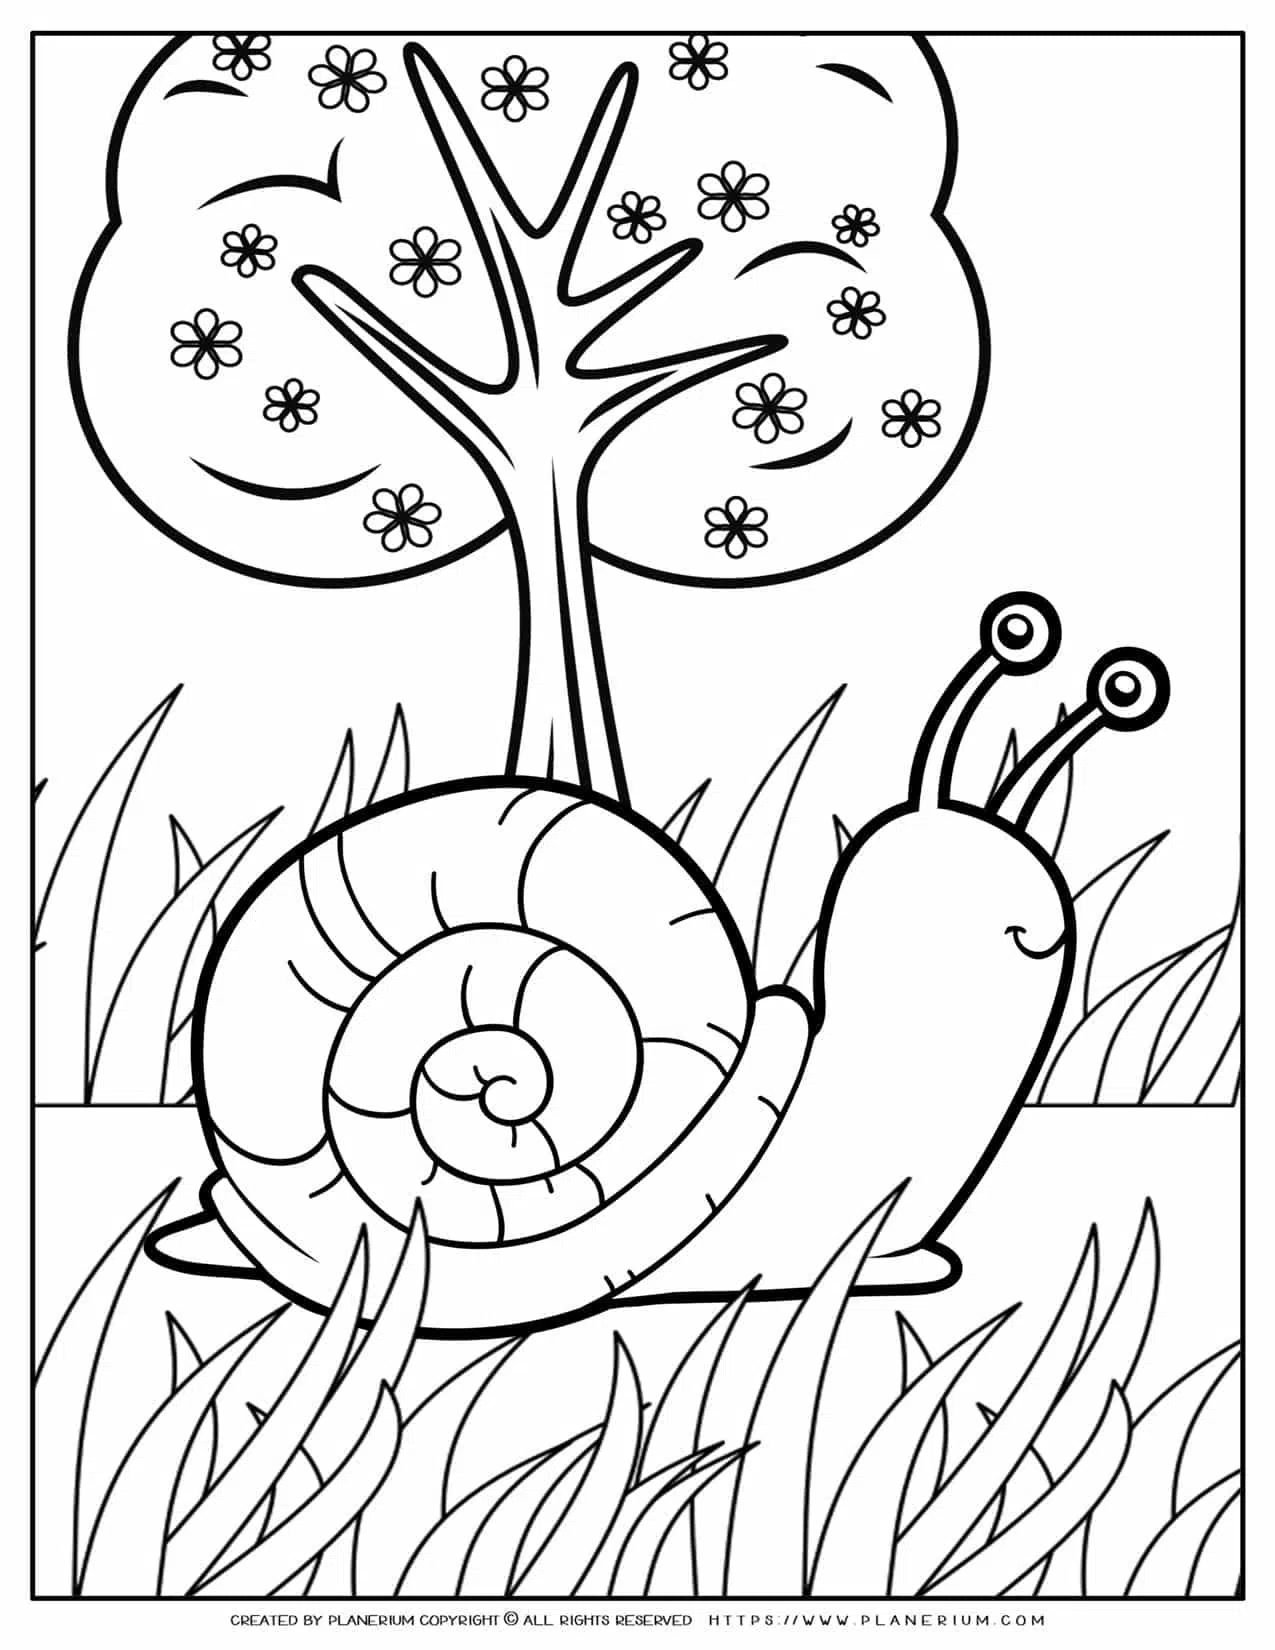 Animals coloring page